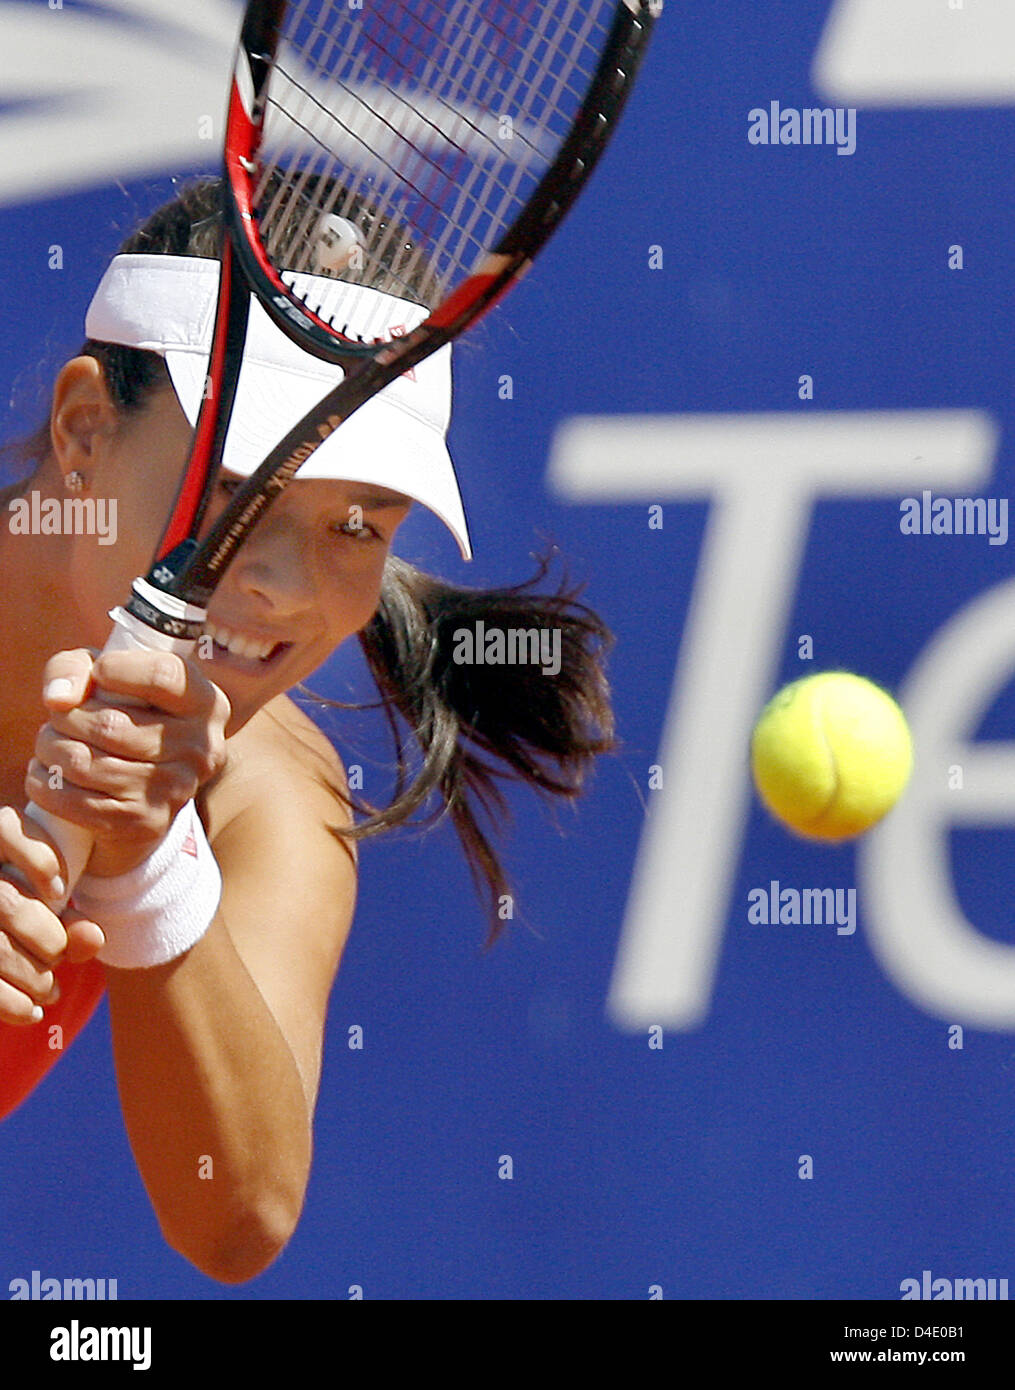 Ana Ivanovic of Serbia returns a backhand to Agnes Szavay of Hungary in their WTA German Open quarter-finals match in Berlin, Germany, 09 May 2008. Ivanovic defeated Szavay 3-6, 6-4, 6-3. Photo: Wolfgang Kumm Stock Photo